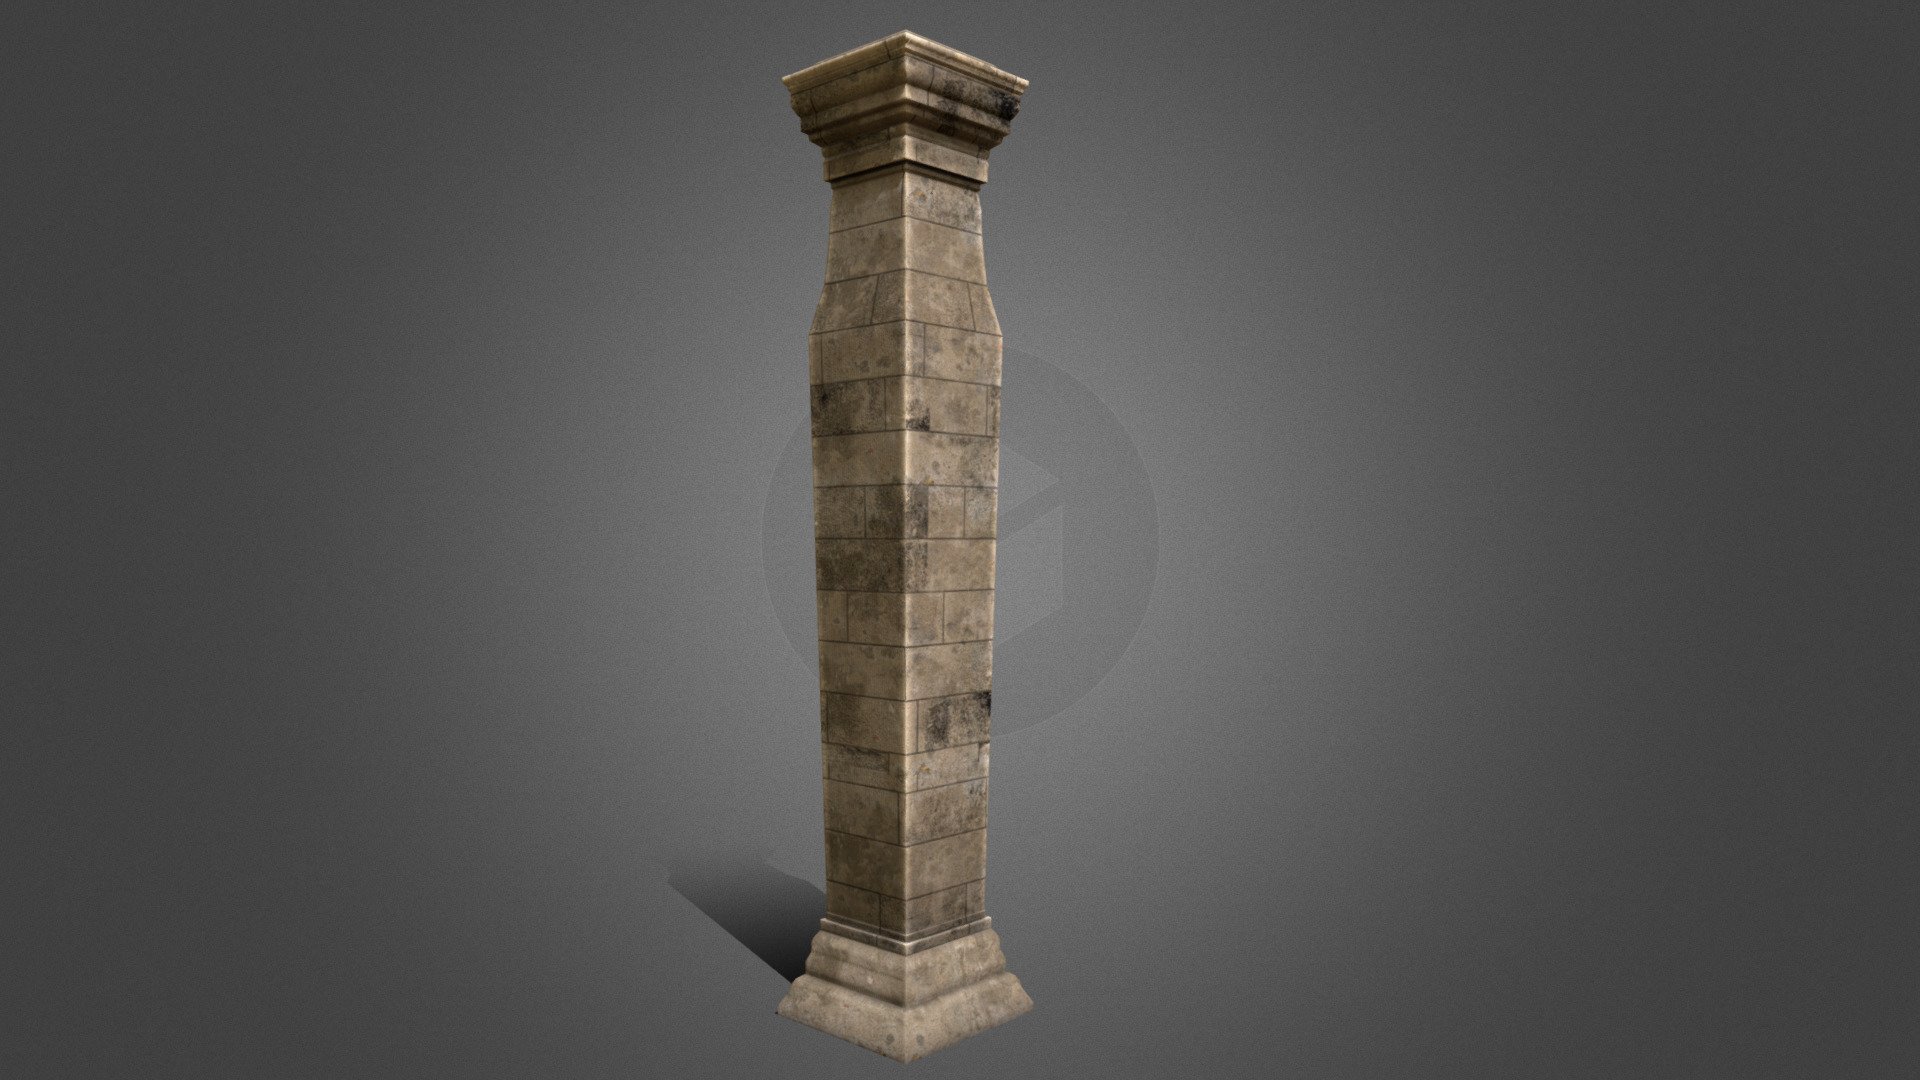 neoegyptian classical column structure - Neoegypt Palace Column - Download Free 3D model by Samuel Francis Johnson (Oneironauticus) (@oneironauticus) 3d model